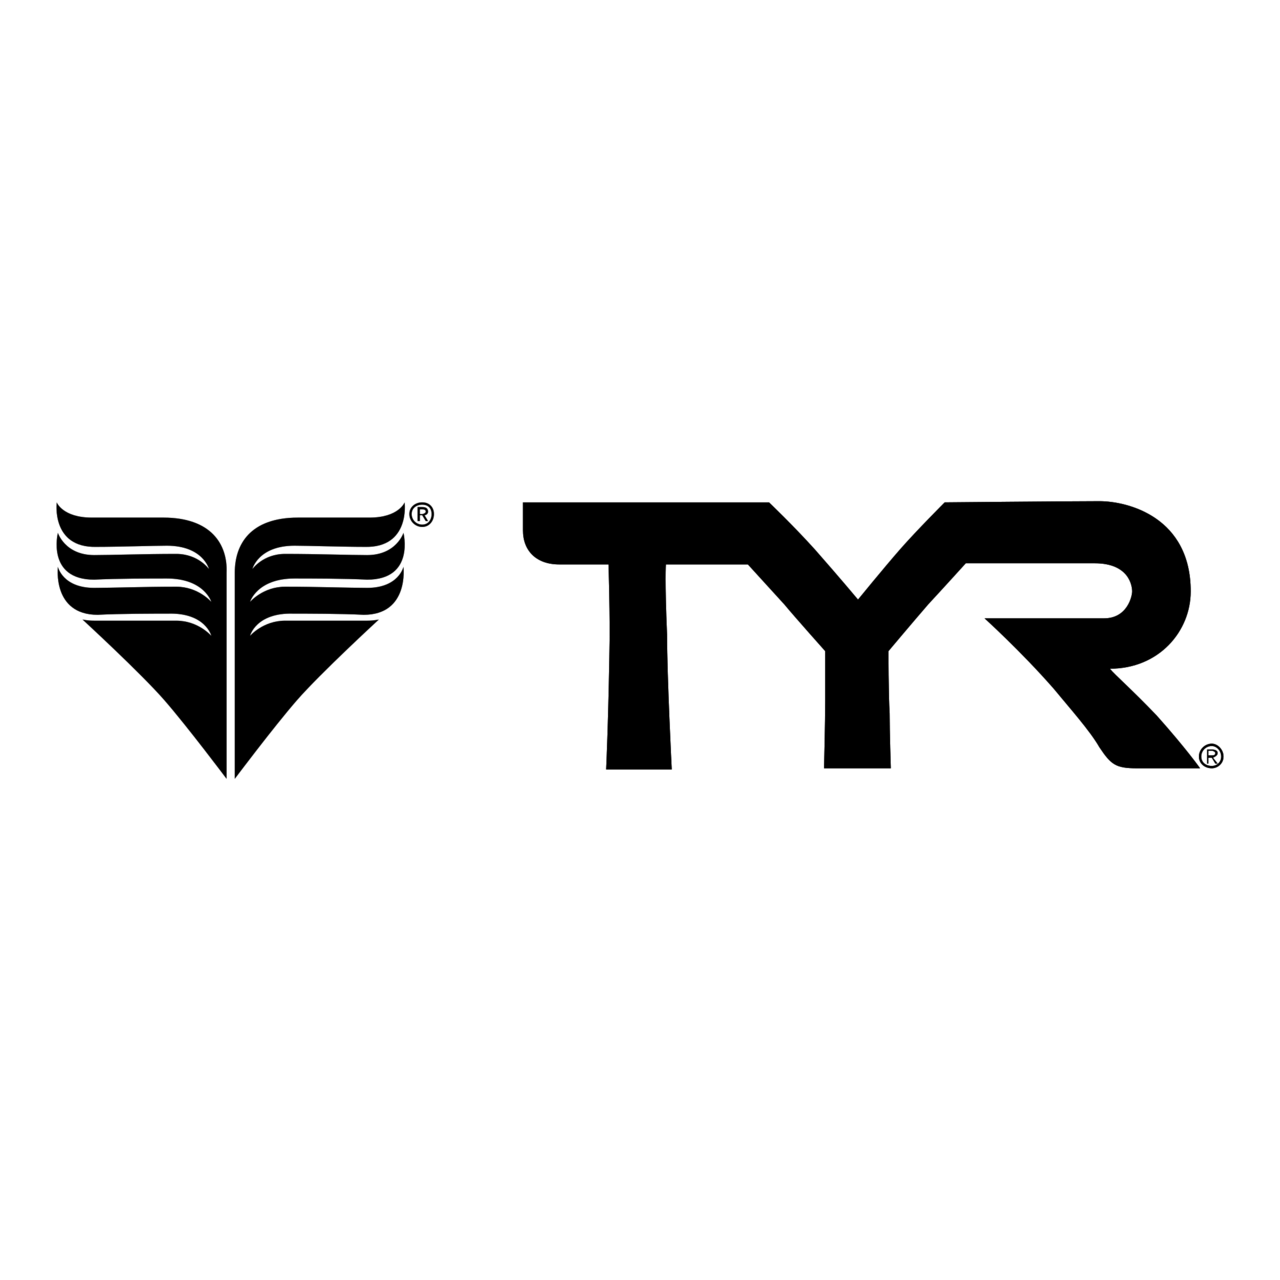 tyr-logo-black-and-white-1.png